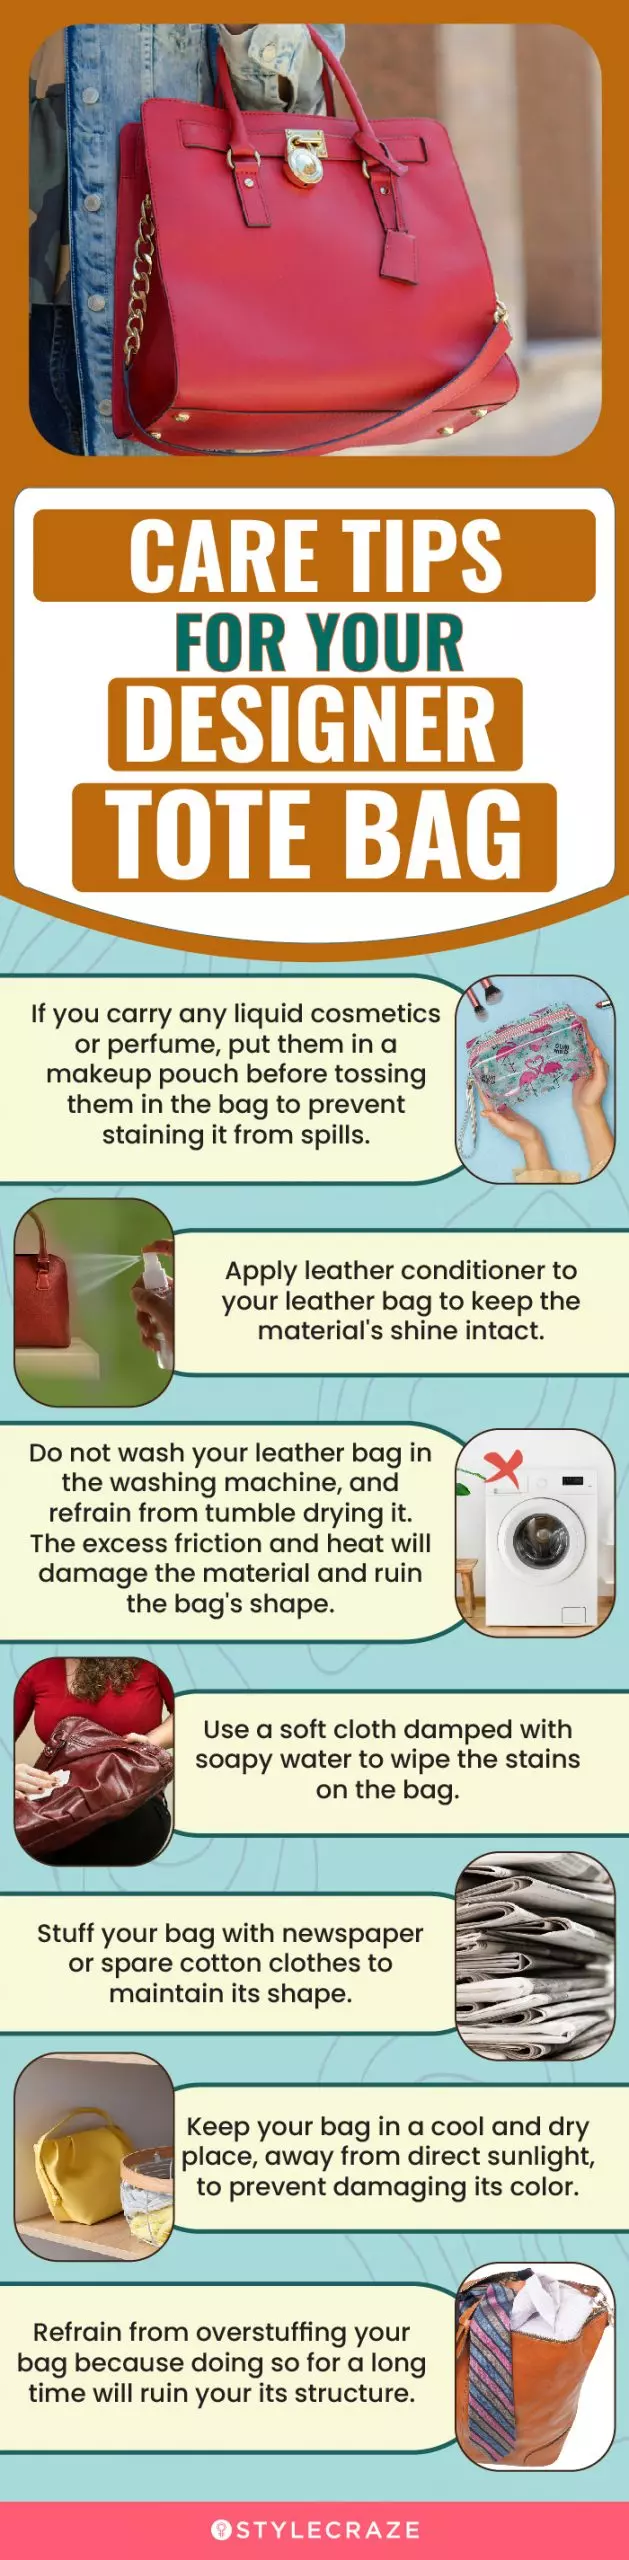  Care Tips For Your Designer Tote Bag (infographic) 